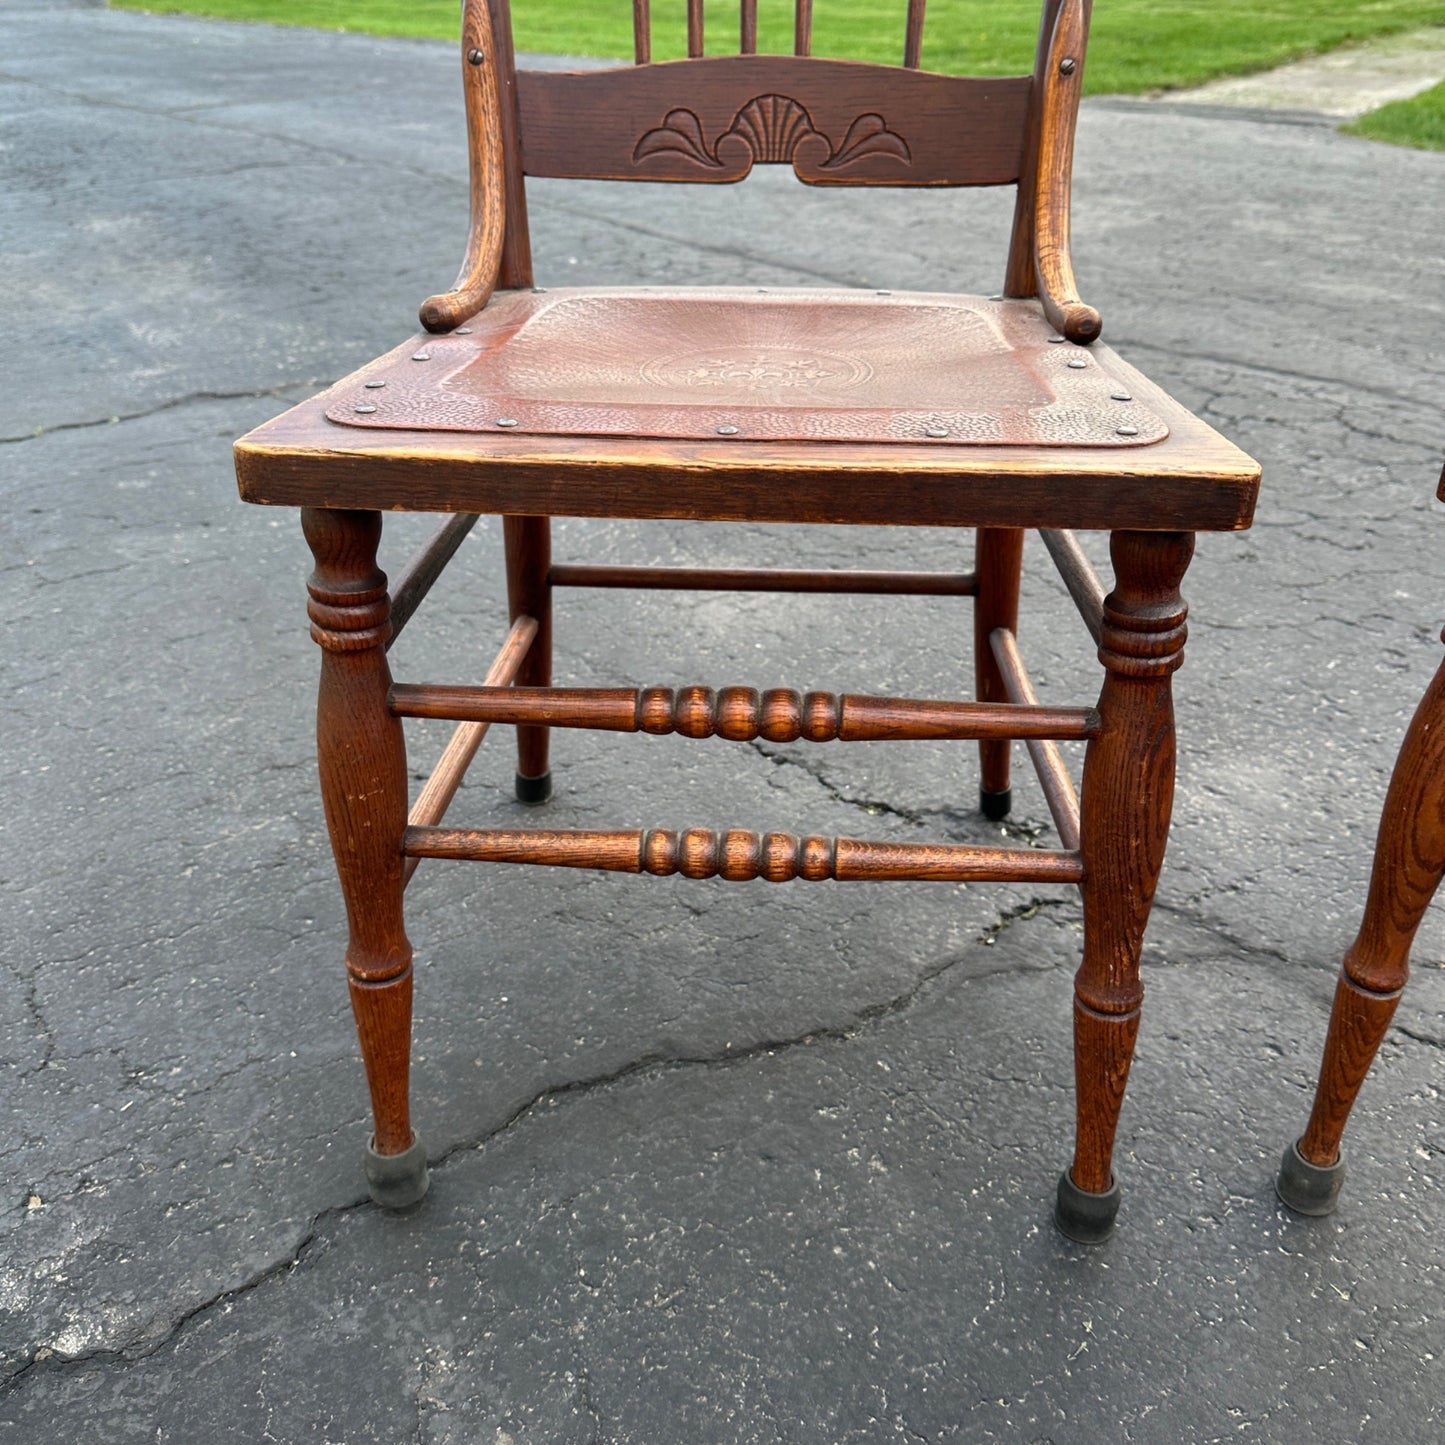 (2) Antique Oak Ornate Carved Chairs with Carved Leather Seats